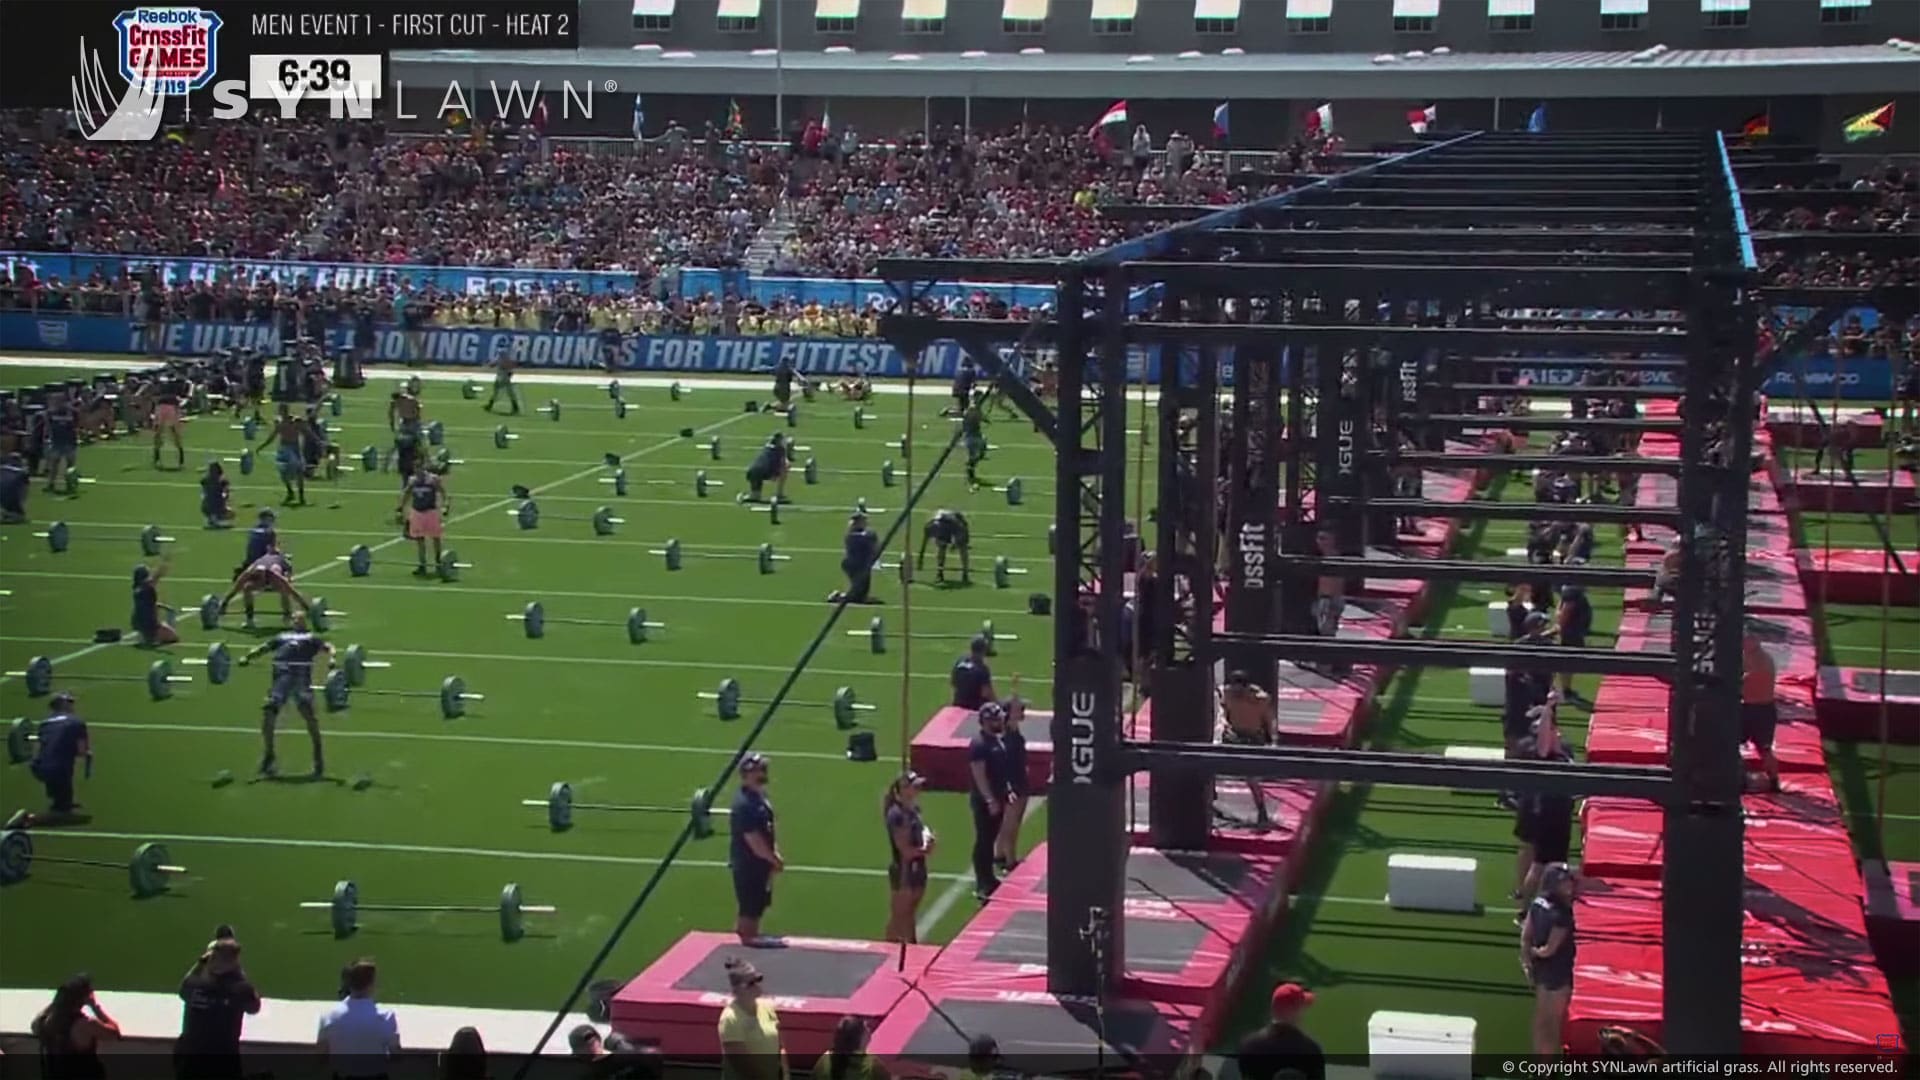 image of synlawn modular turf system at the crossfit games 20192